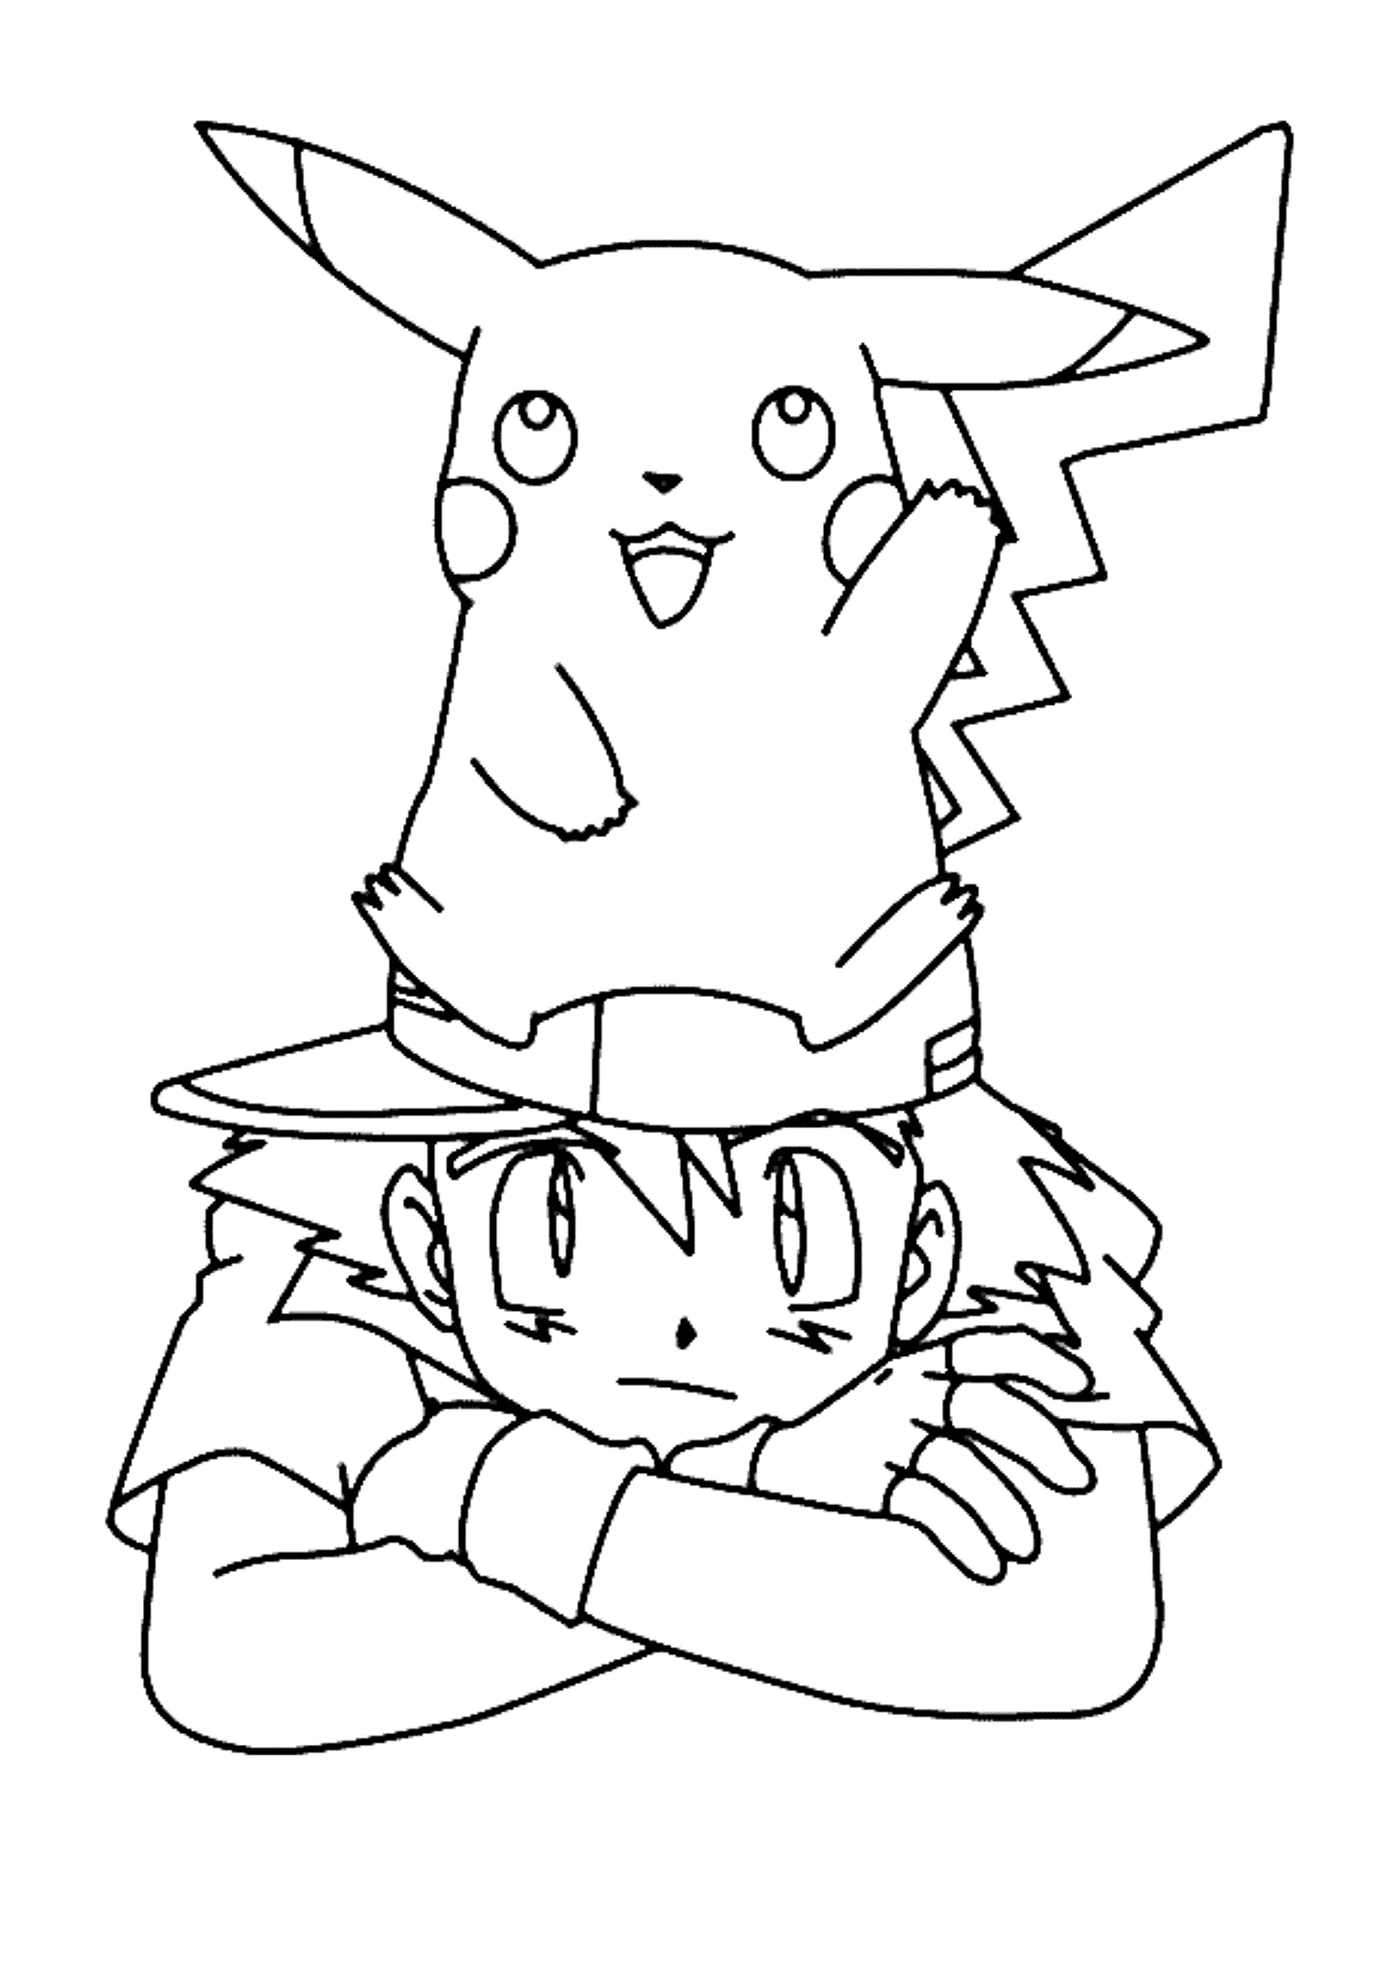  A boy and Pikachu in tandem 